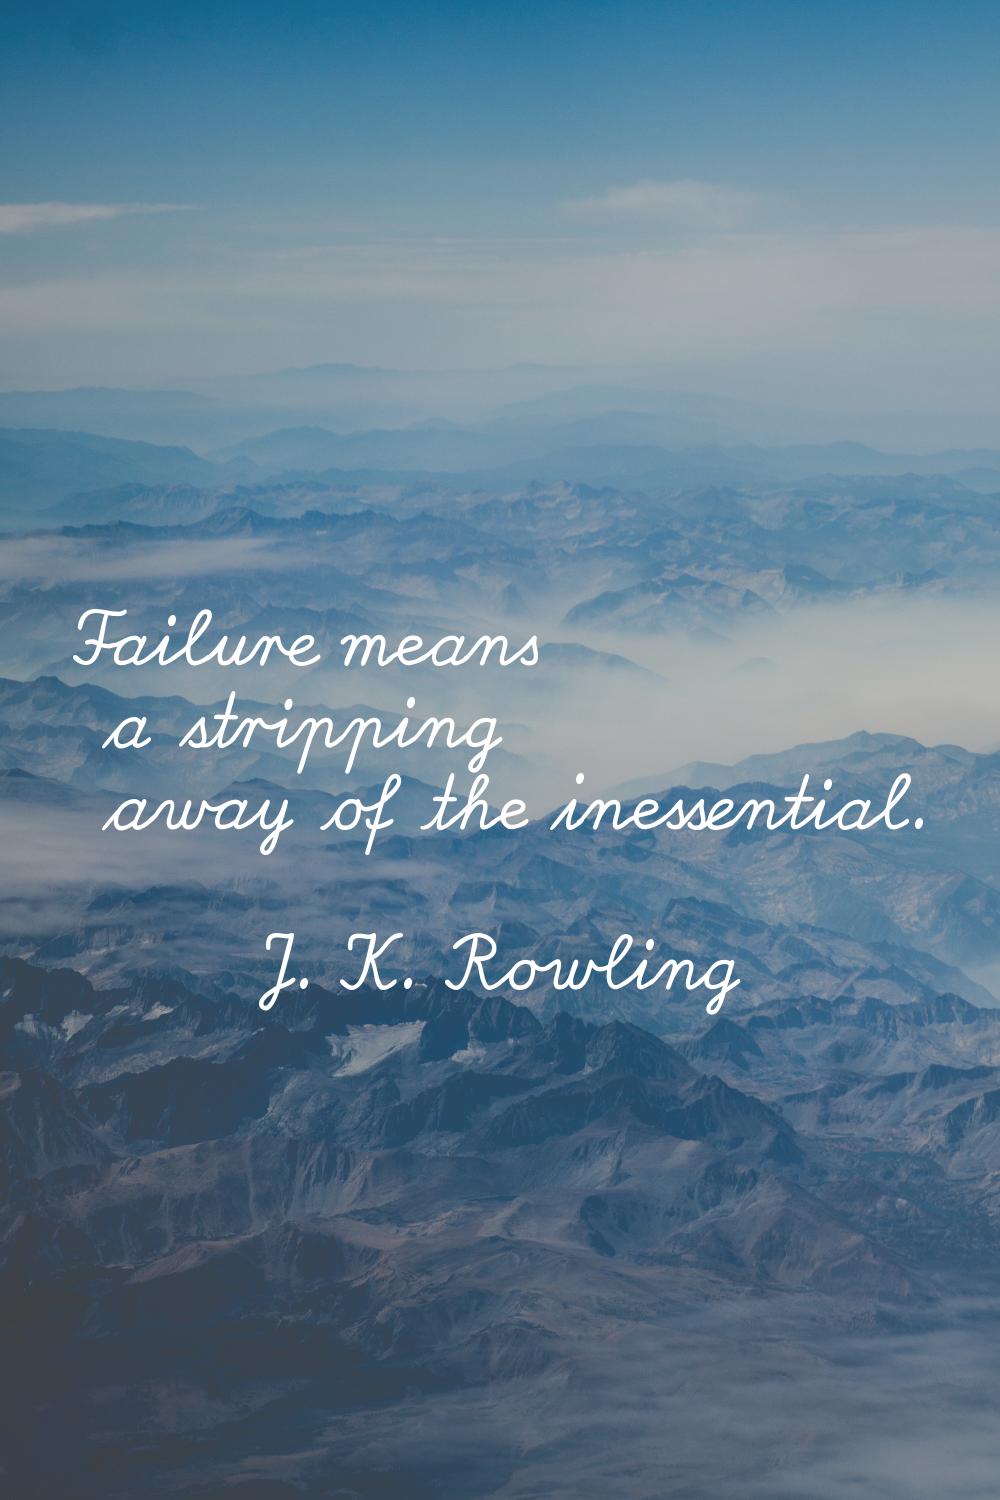 Failure means a stripping away of the inessential.